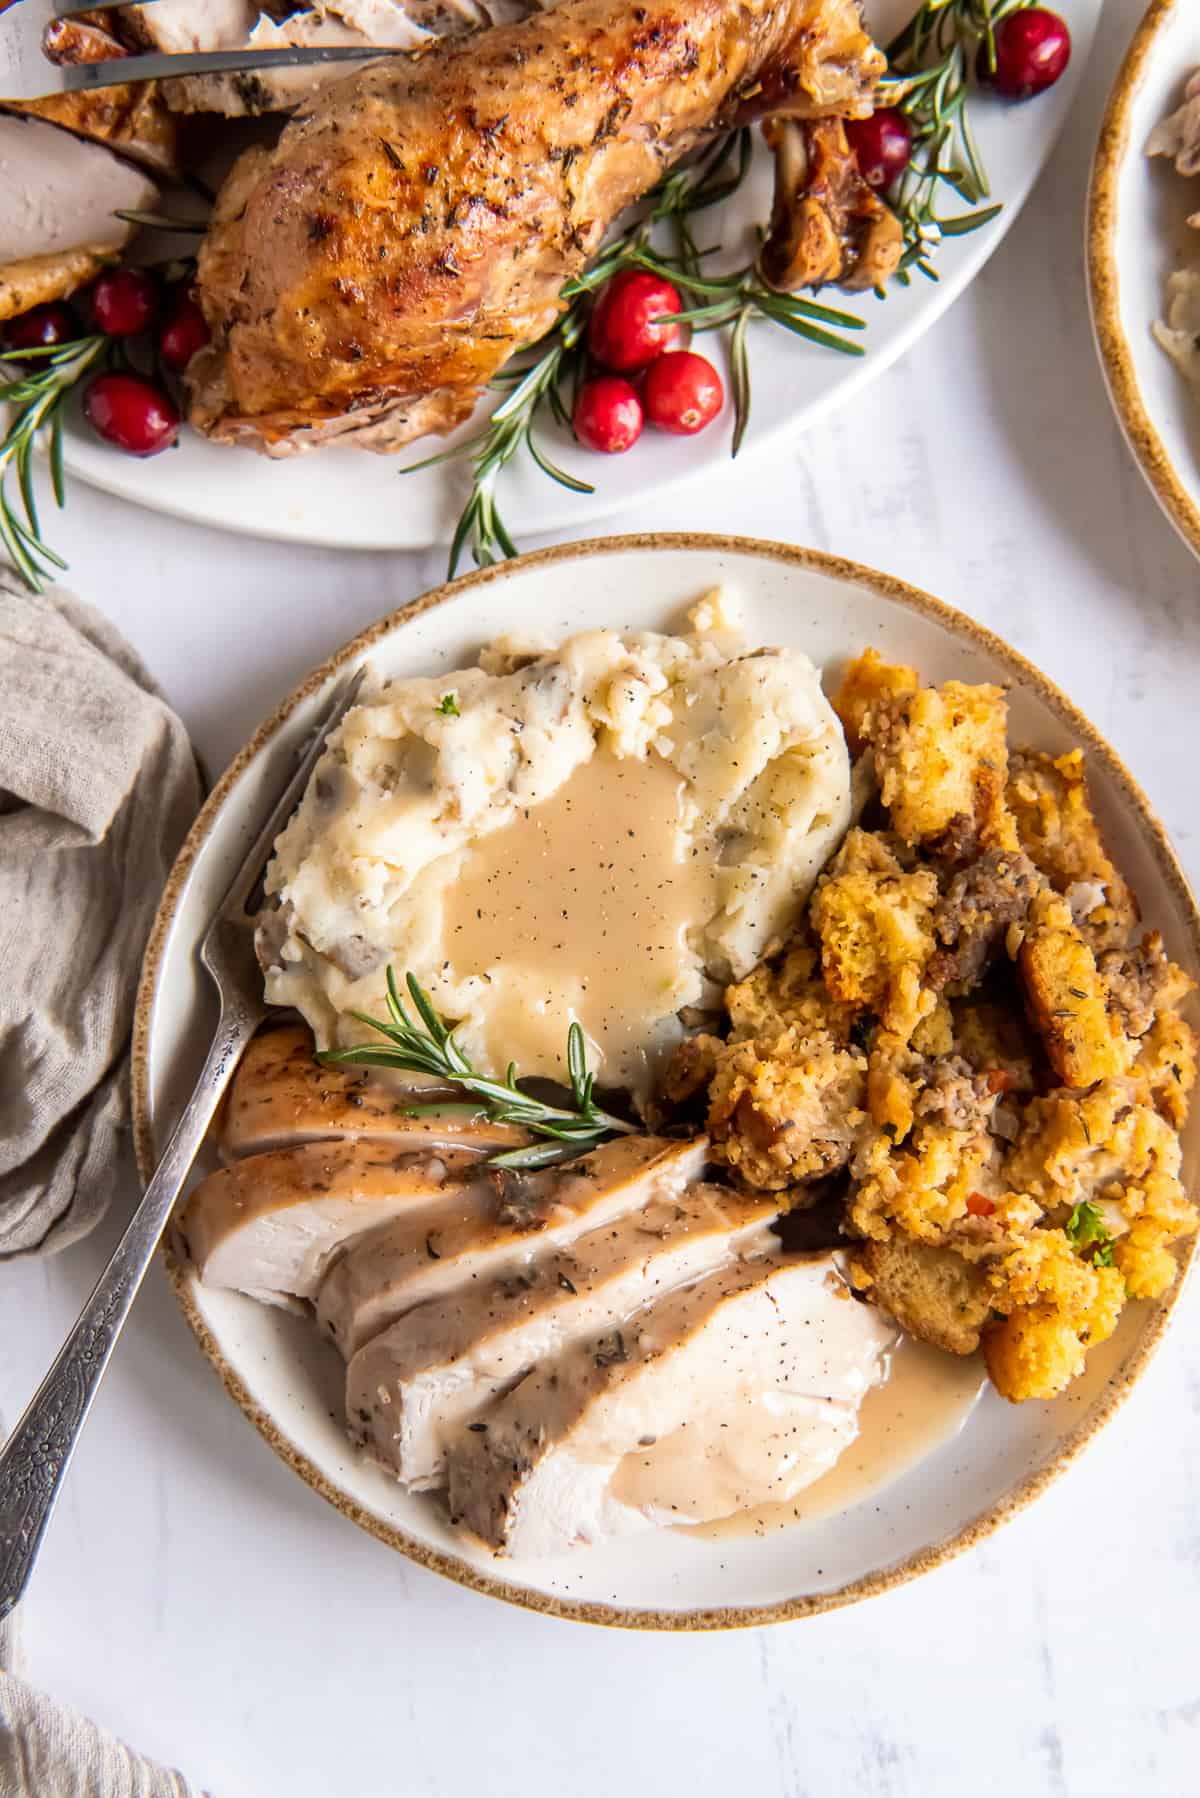 A plate with sliced turkey, gravy, mashed potatoes and stuffing.